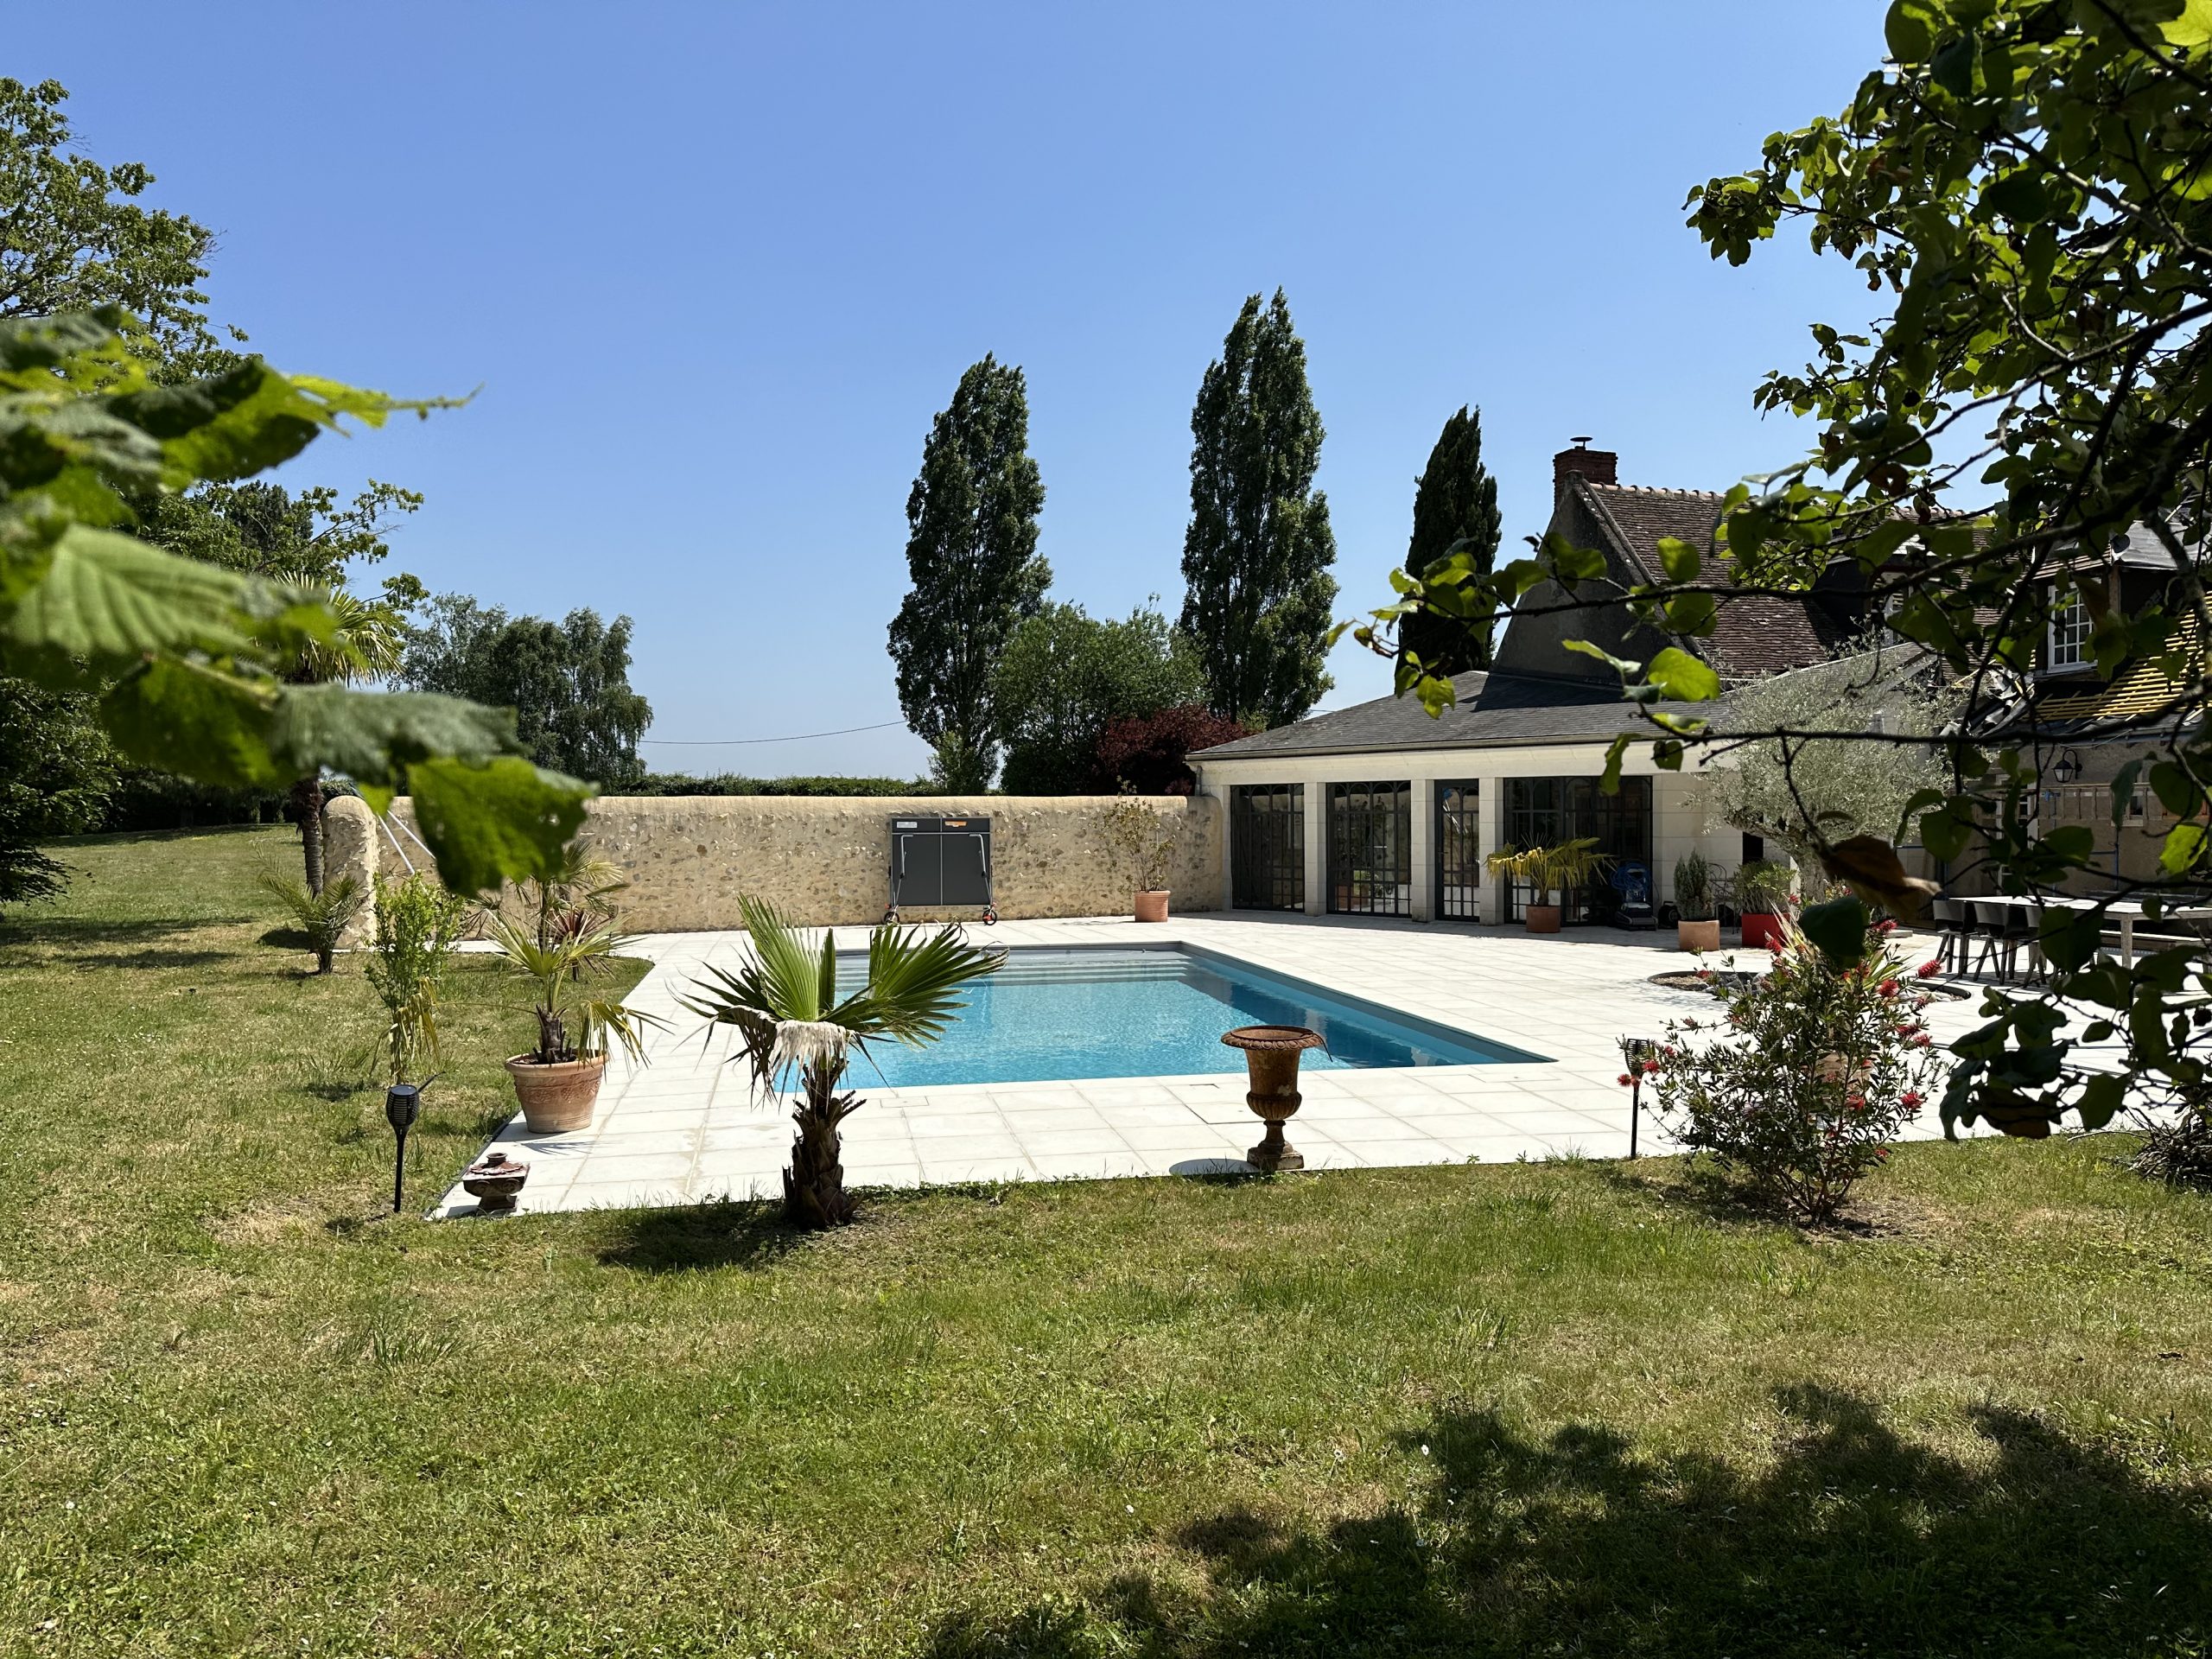 NORTH PROPERTY of TOURS PARC on 2 Hectares SWIMMING POOL GARAGE